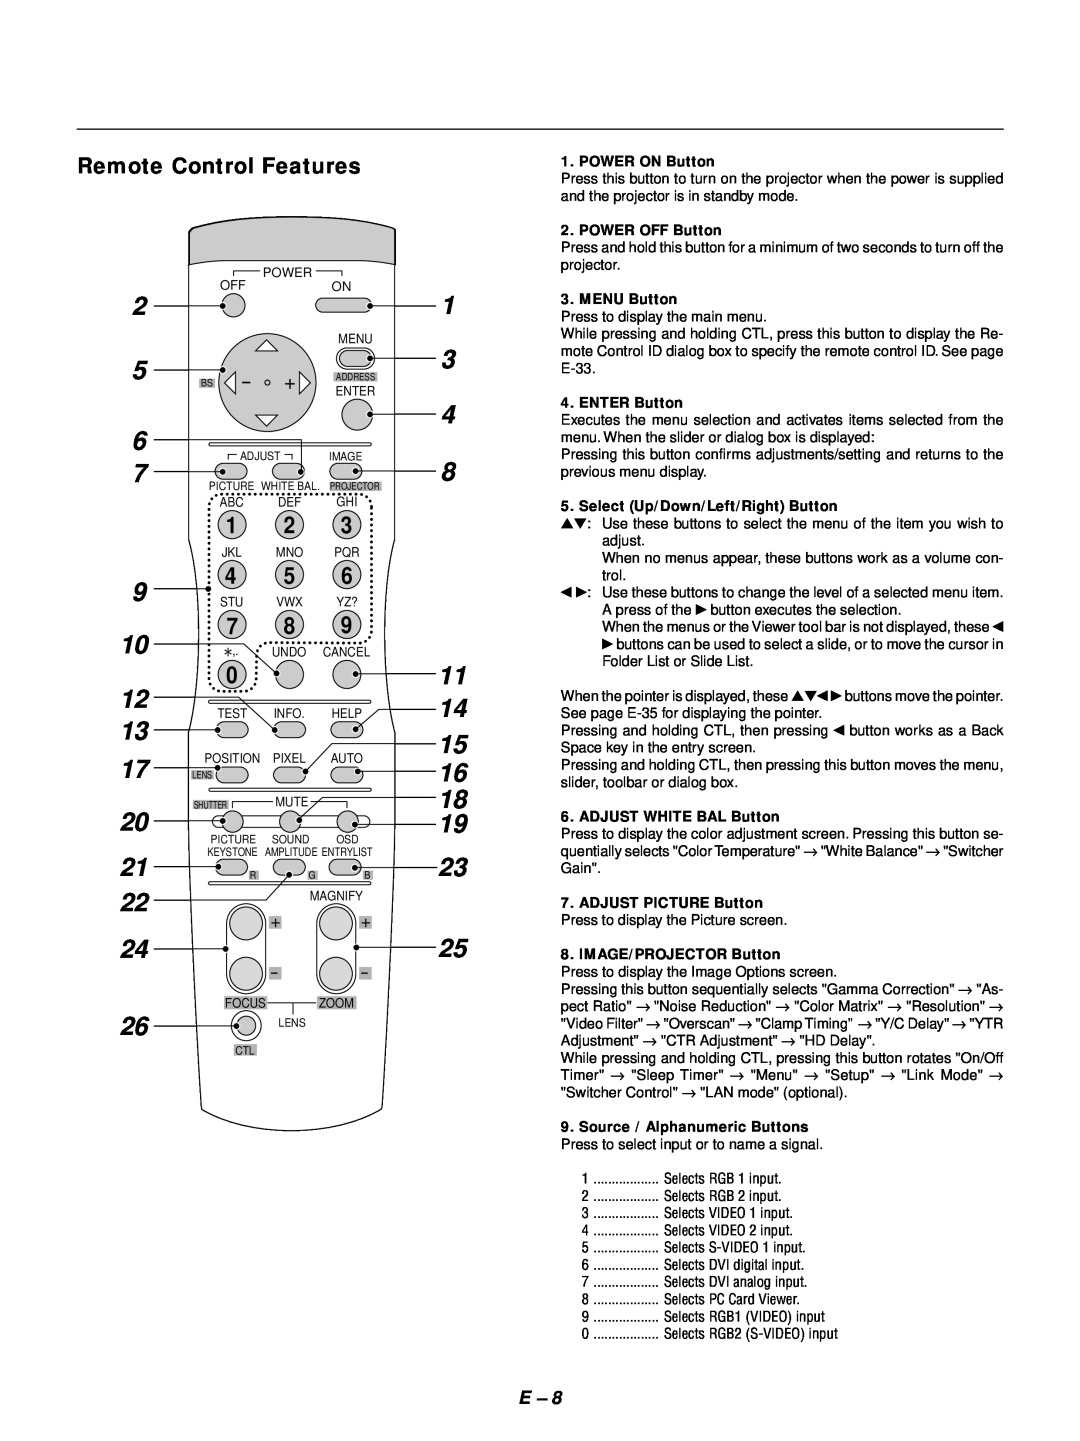 NEC GT1150 user manual Remote Control Features 